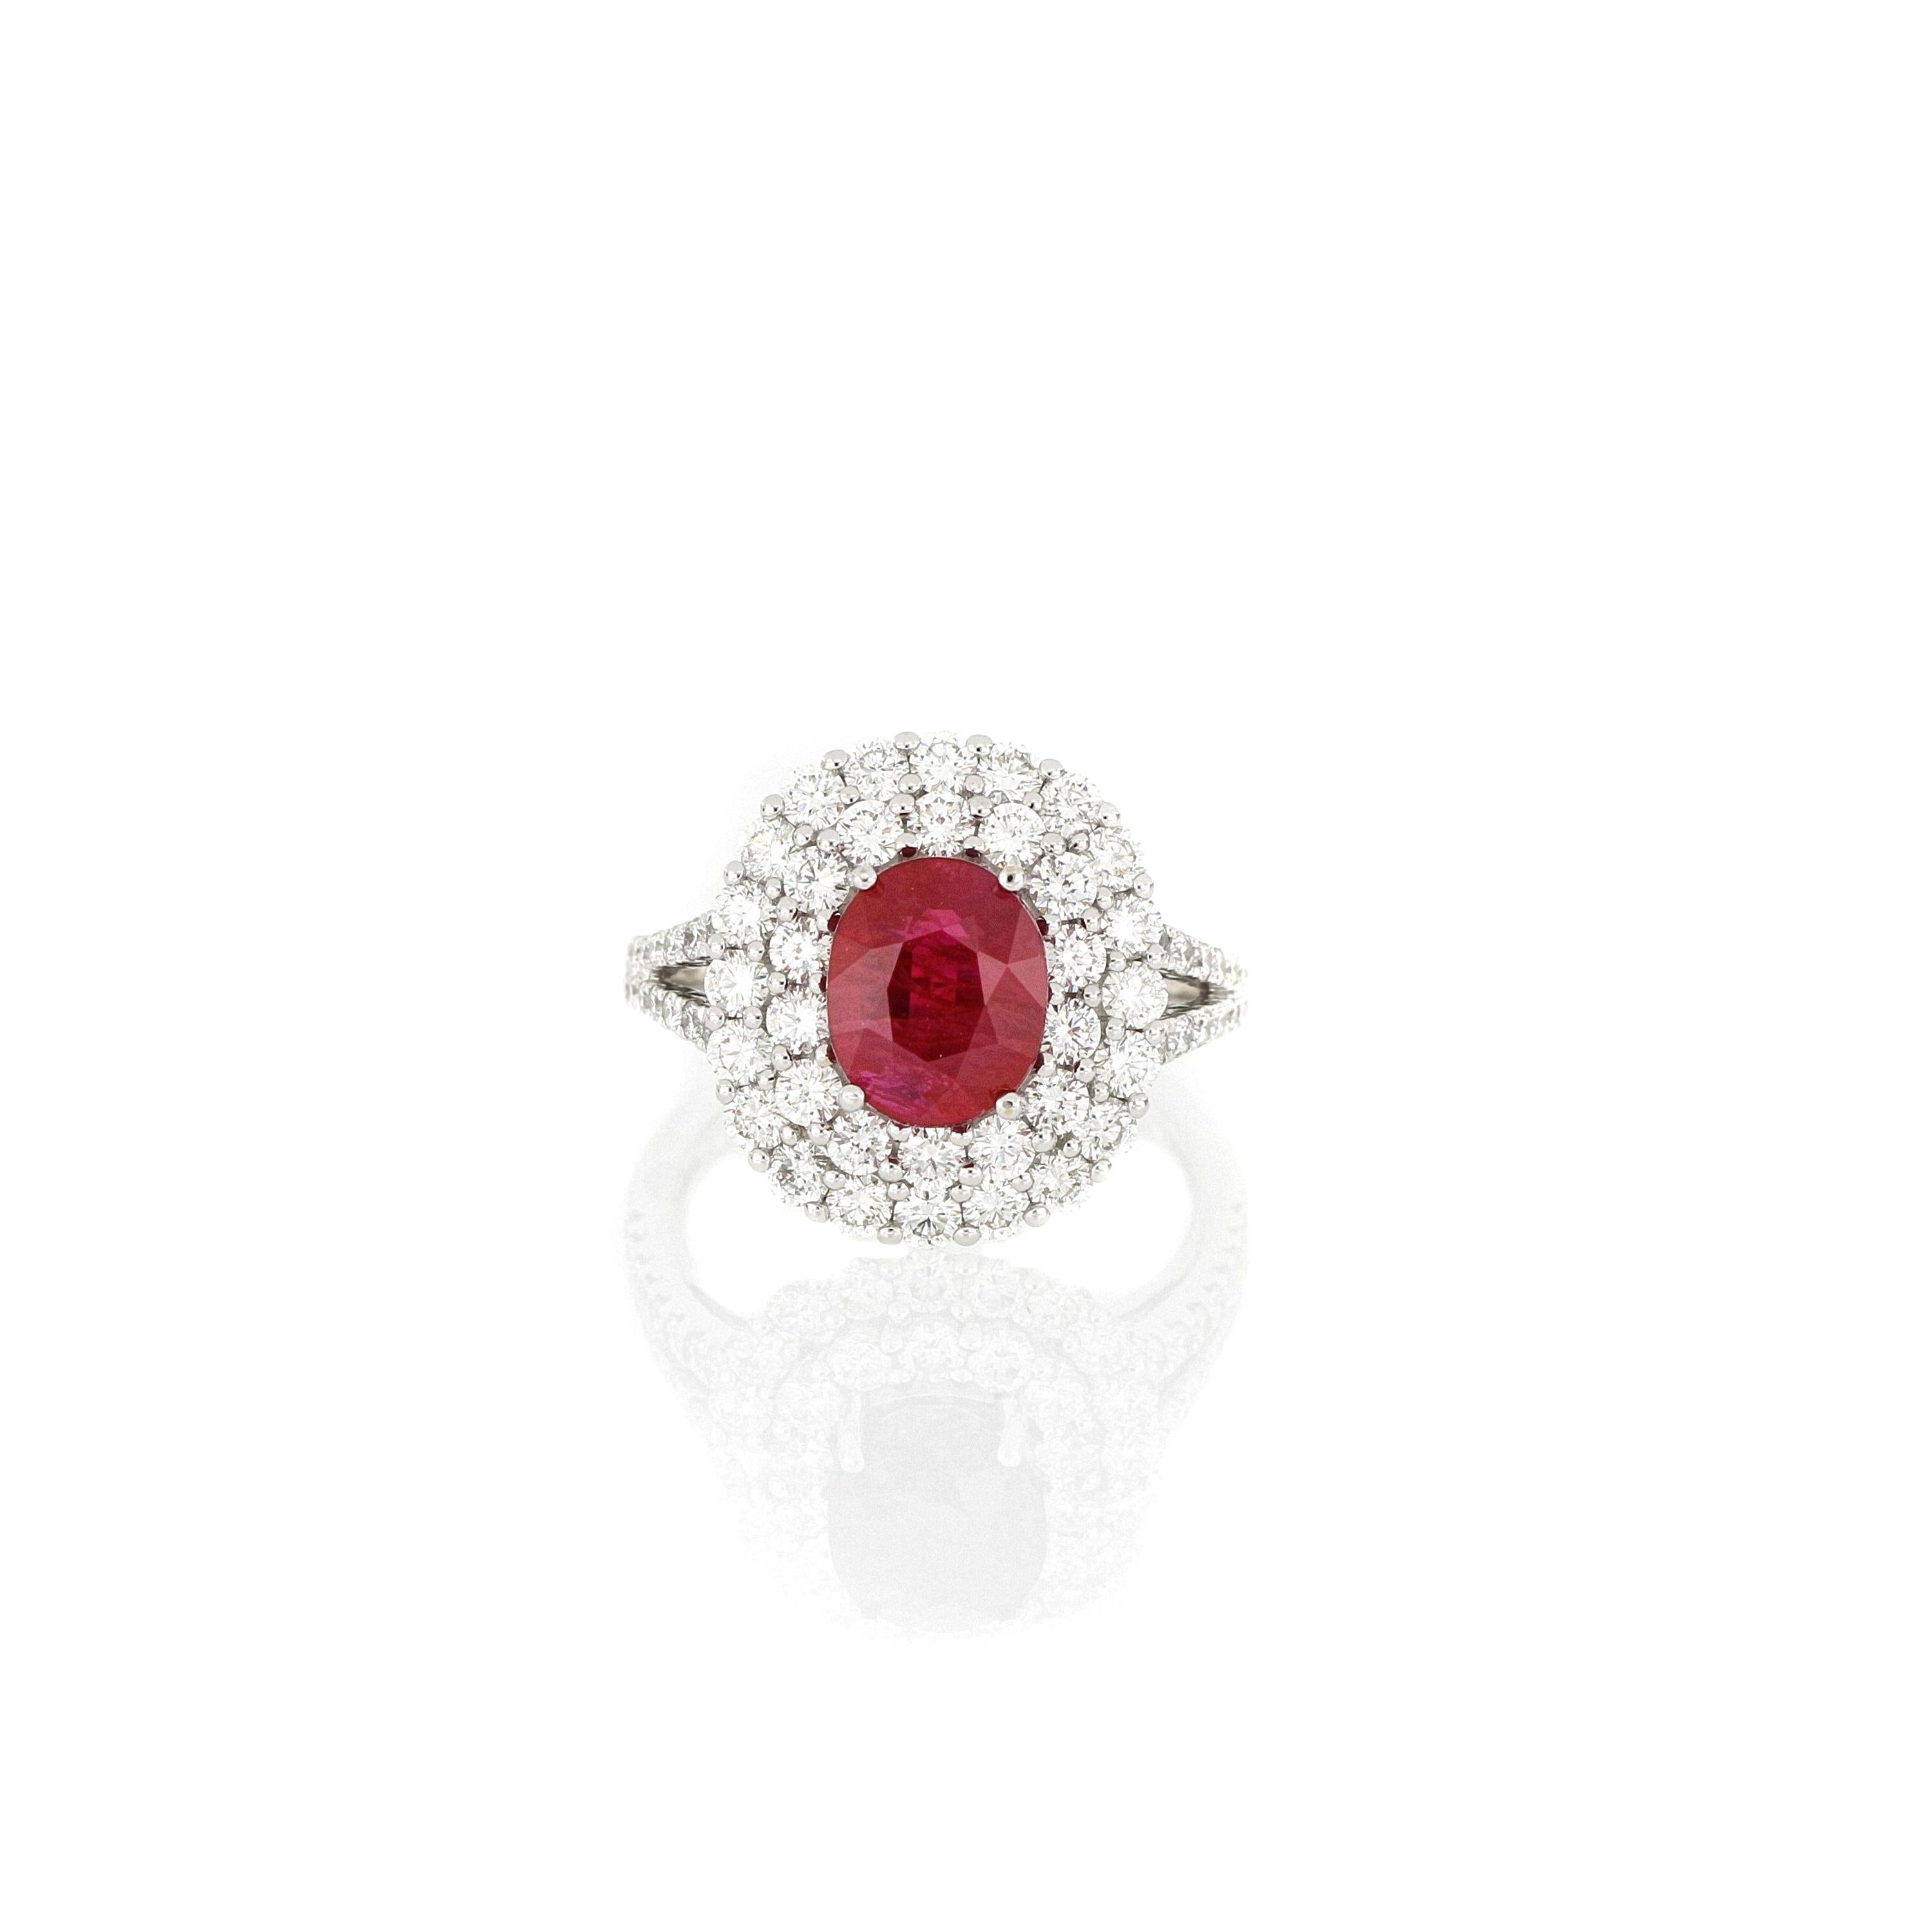 A fabulous natural ruby and diamond ring, A pigeon’s blood colour oval brilliant-cut ruby weighing 2.99cts, sourced in Burma, surrounded by round brilliant-cut diamonds extending to the shoulders, totaling 1.64cts , mounted in 18 karat white